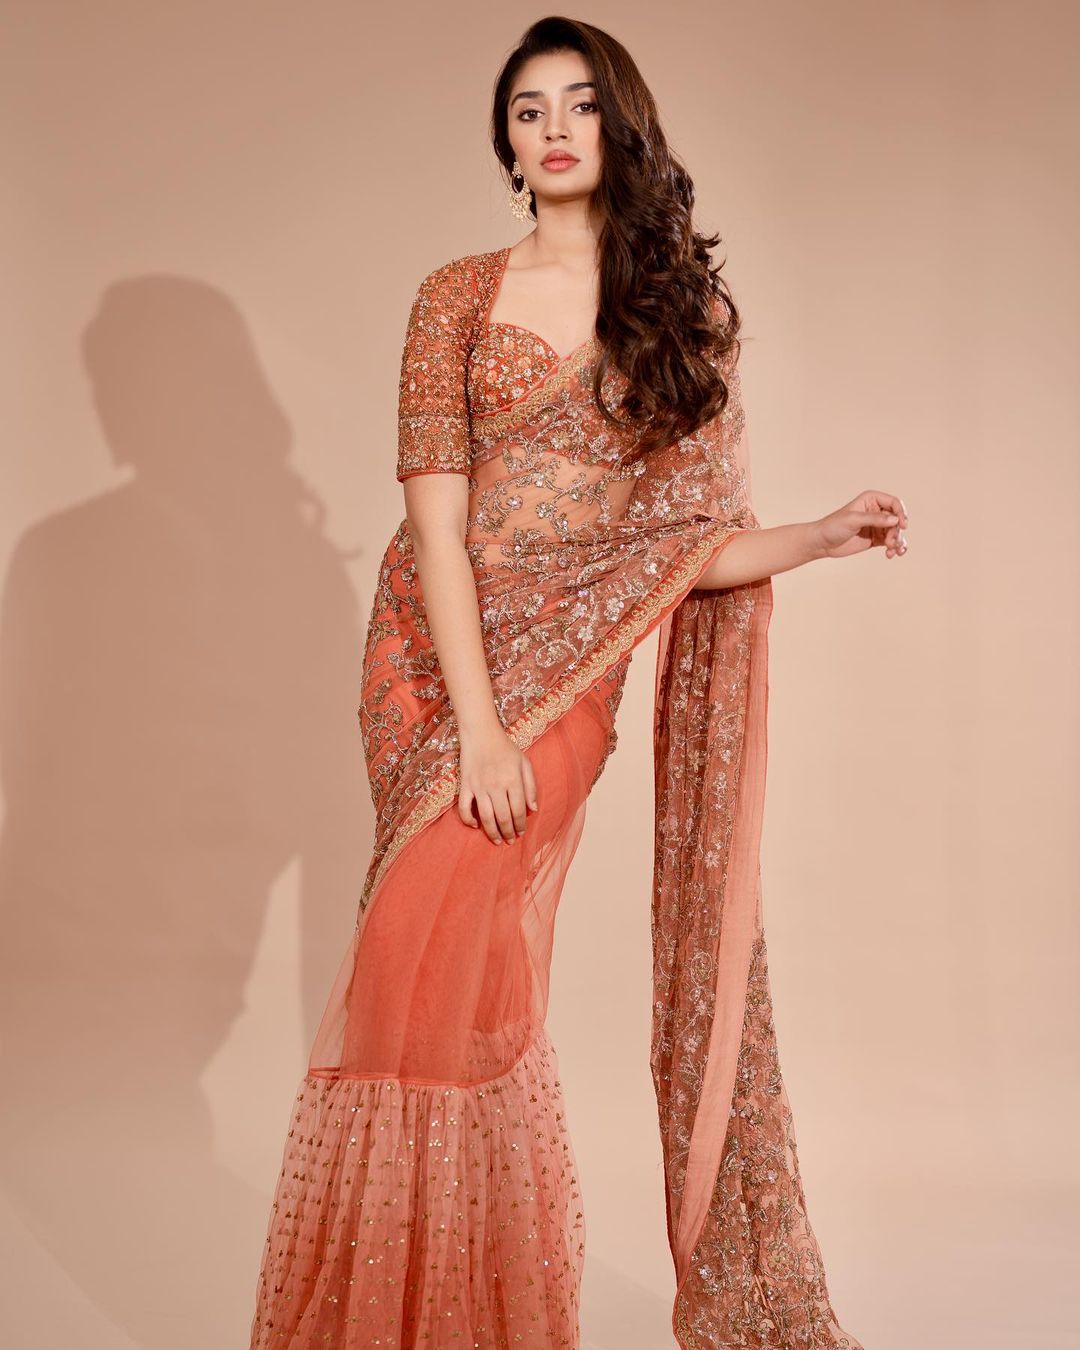 Krithi Shetty Orange Ruffle Saree Look Gives Us Festive Vibe Krithi Shetty Setting Some Major Traditional and Ethnic Outfit Look Inspo